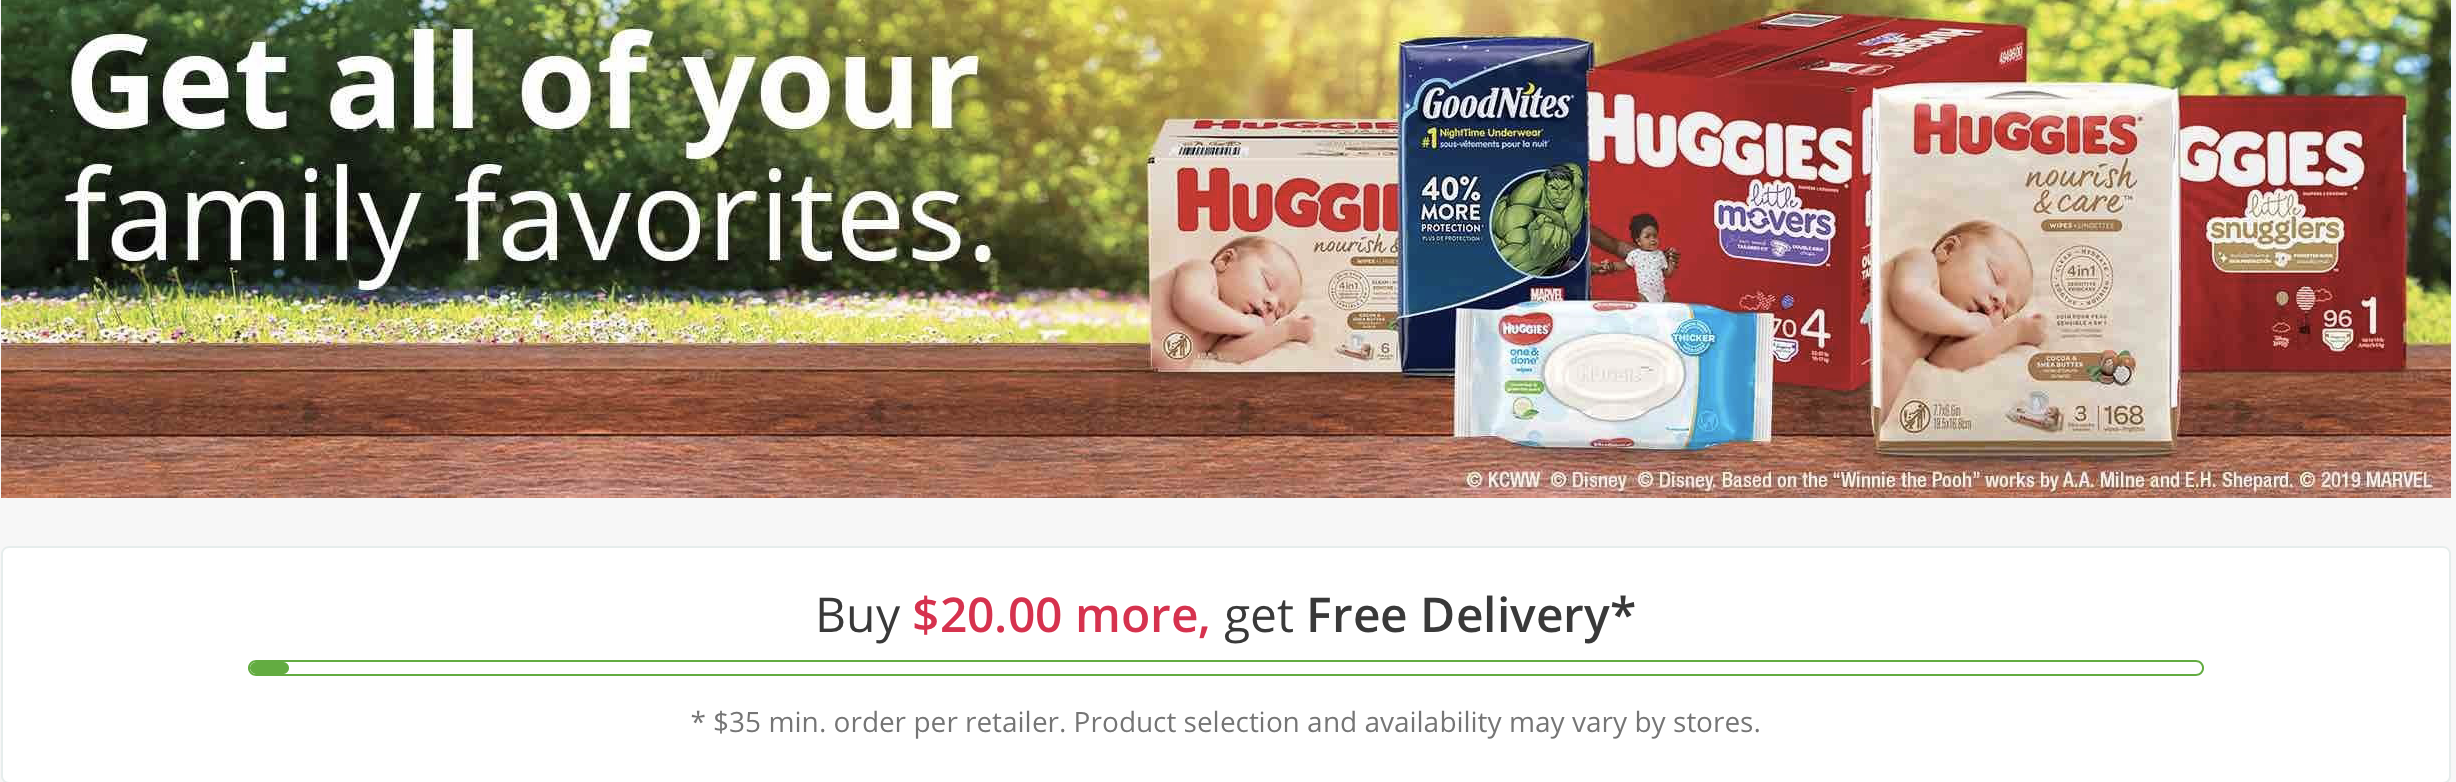 Free Instacart Delivery With A $20 Huggies, Pull-Ups & GoodNites Purchase At Publix on I Heart Publix